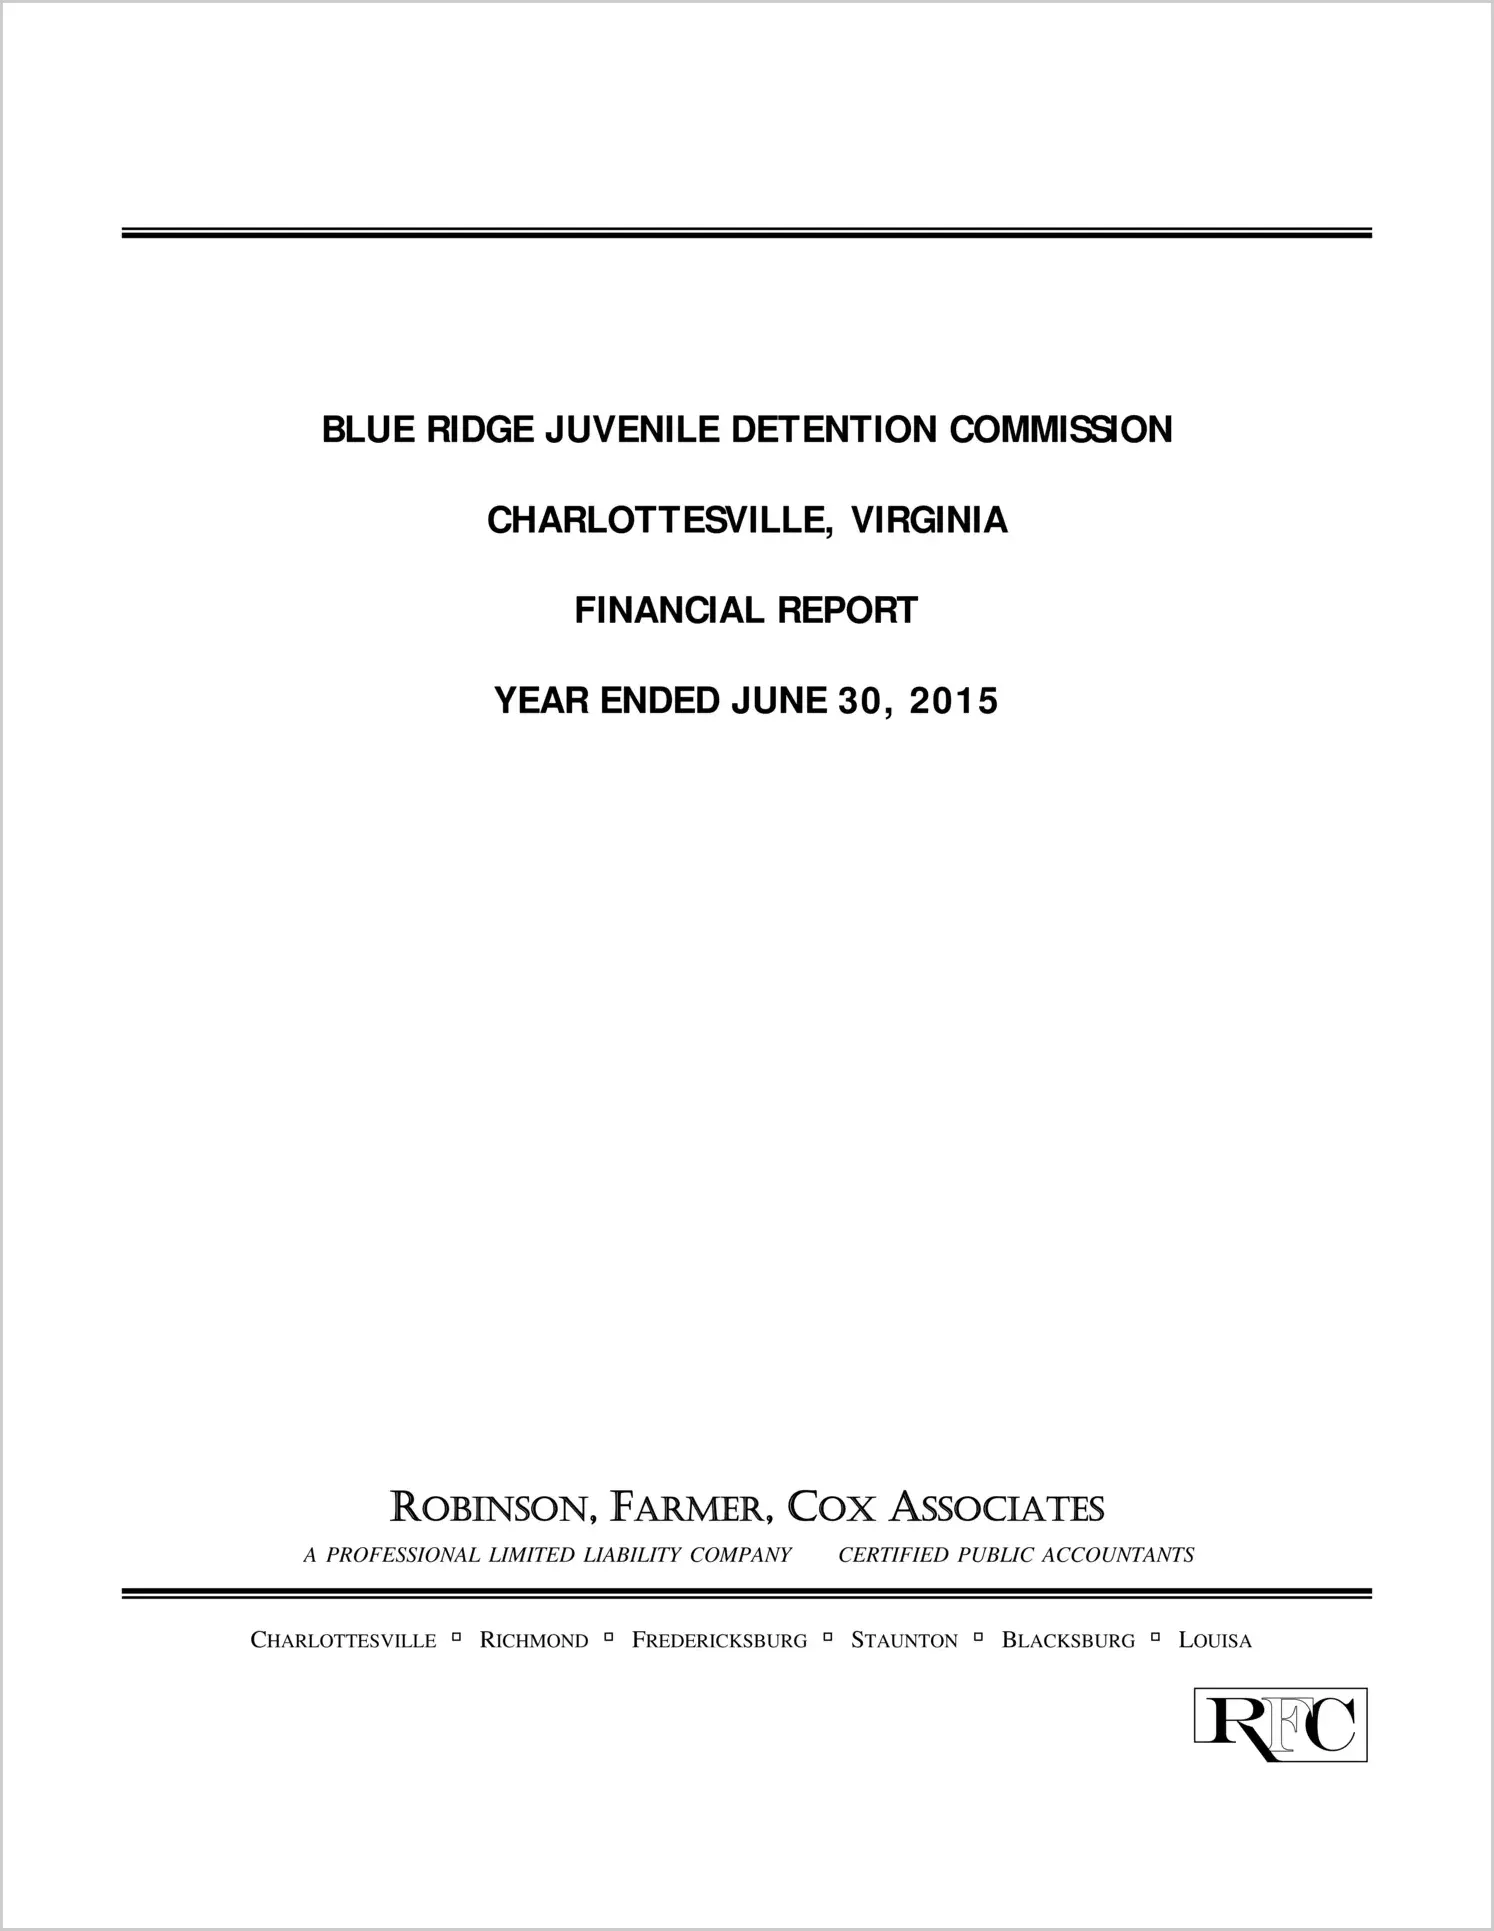 2015 ABC/Other Annual Financial Report  for Blue Ridge Juvenile Detention Commission